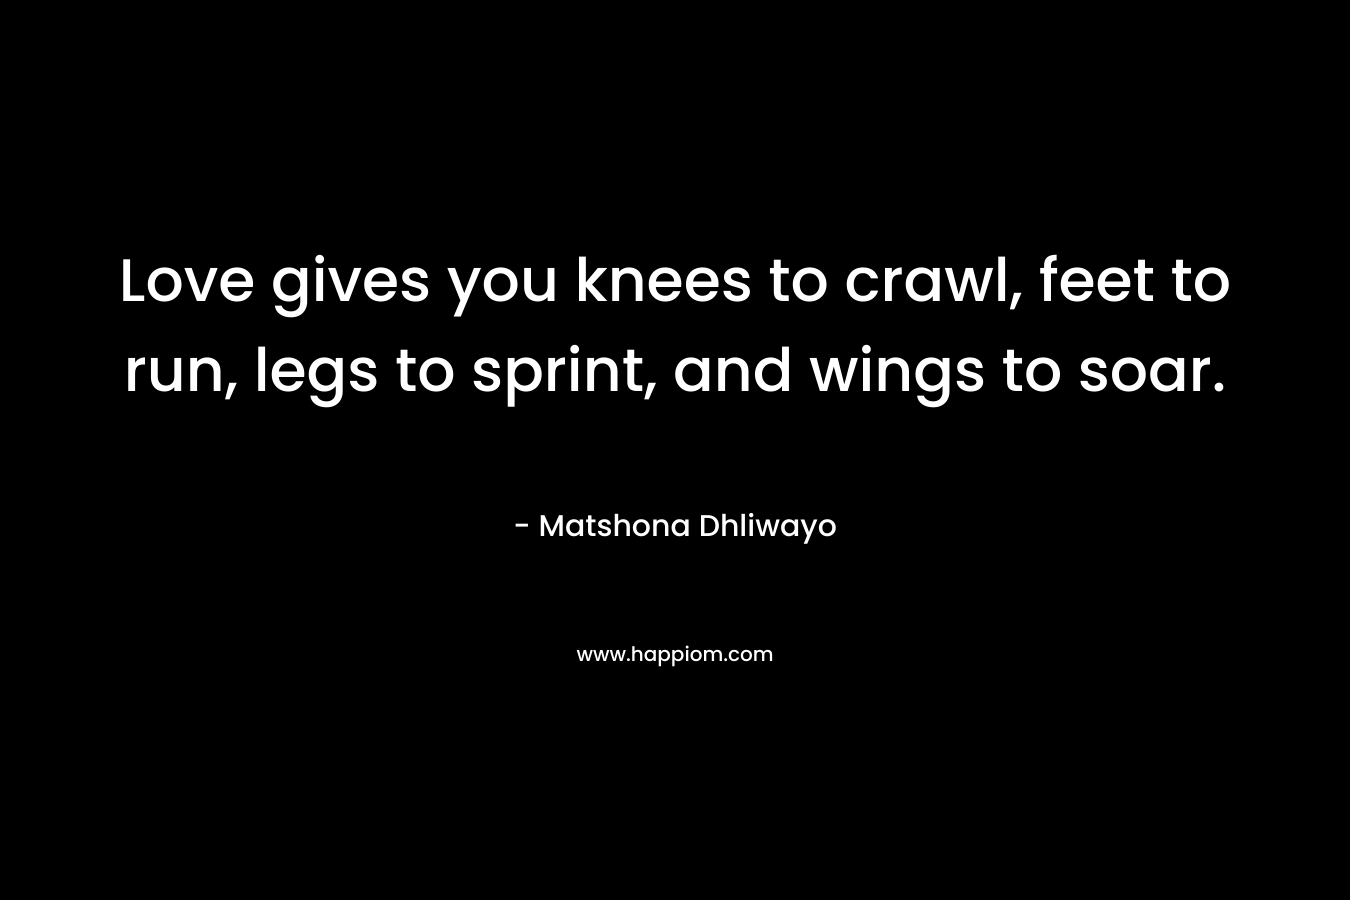 Love gives you knees to crawl, feet to run, legs to sprint, and wings to soar. – Matshona Dhliwayo